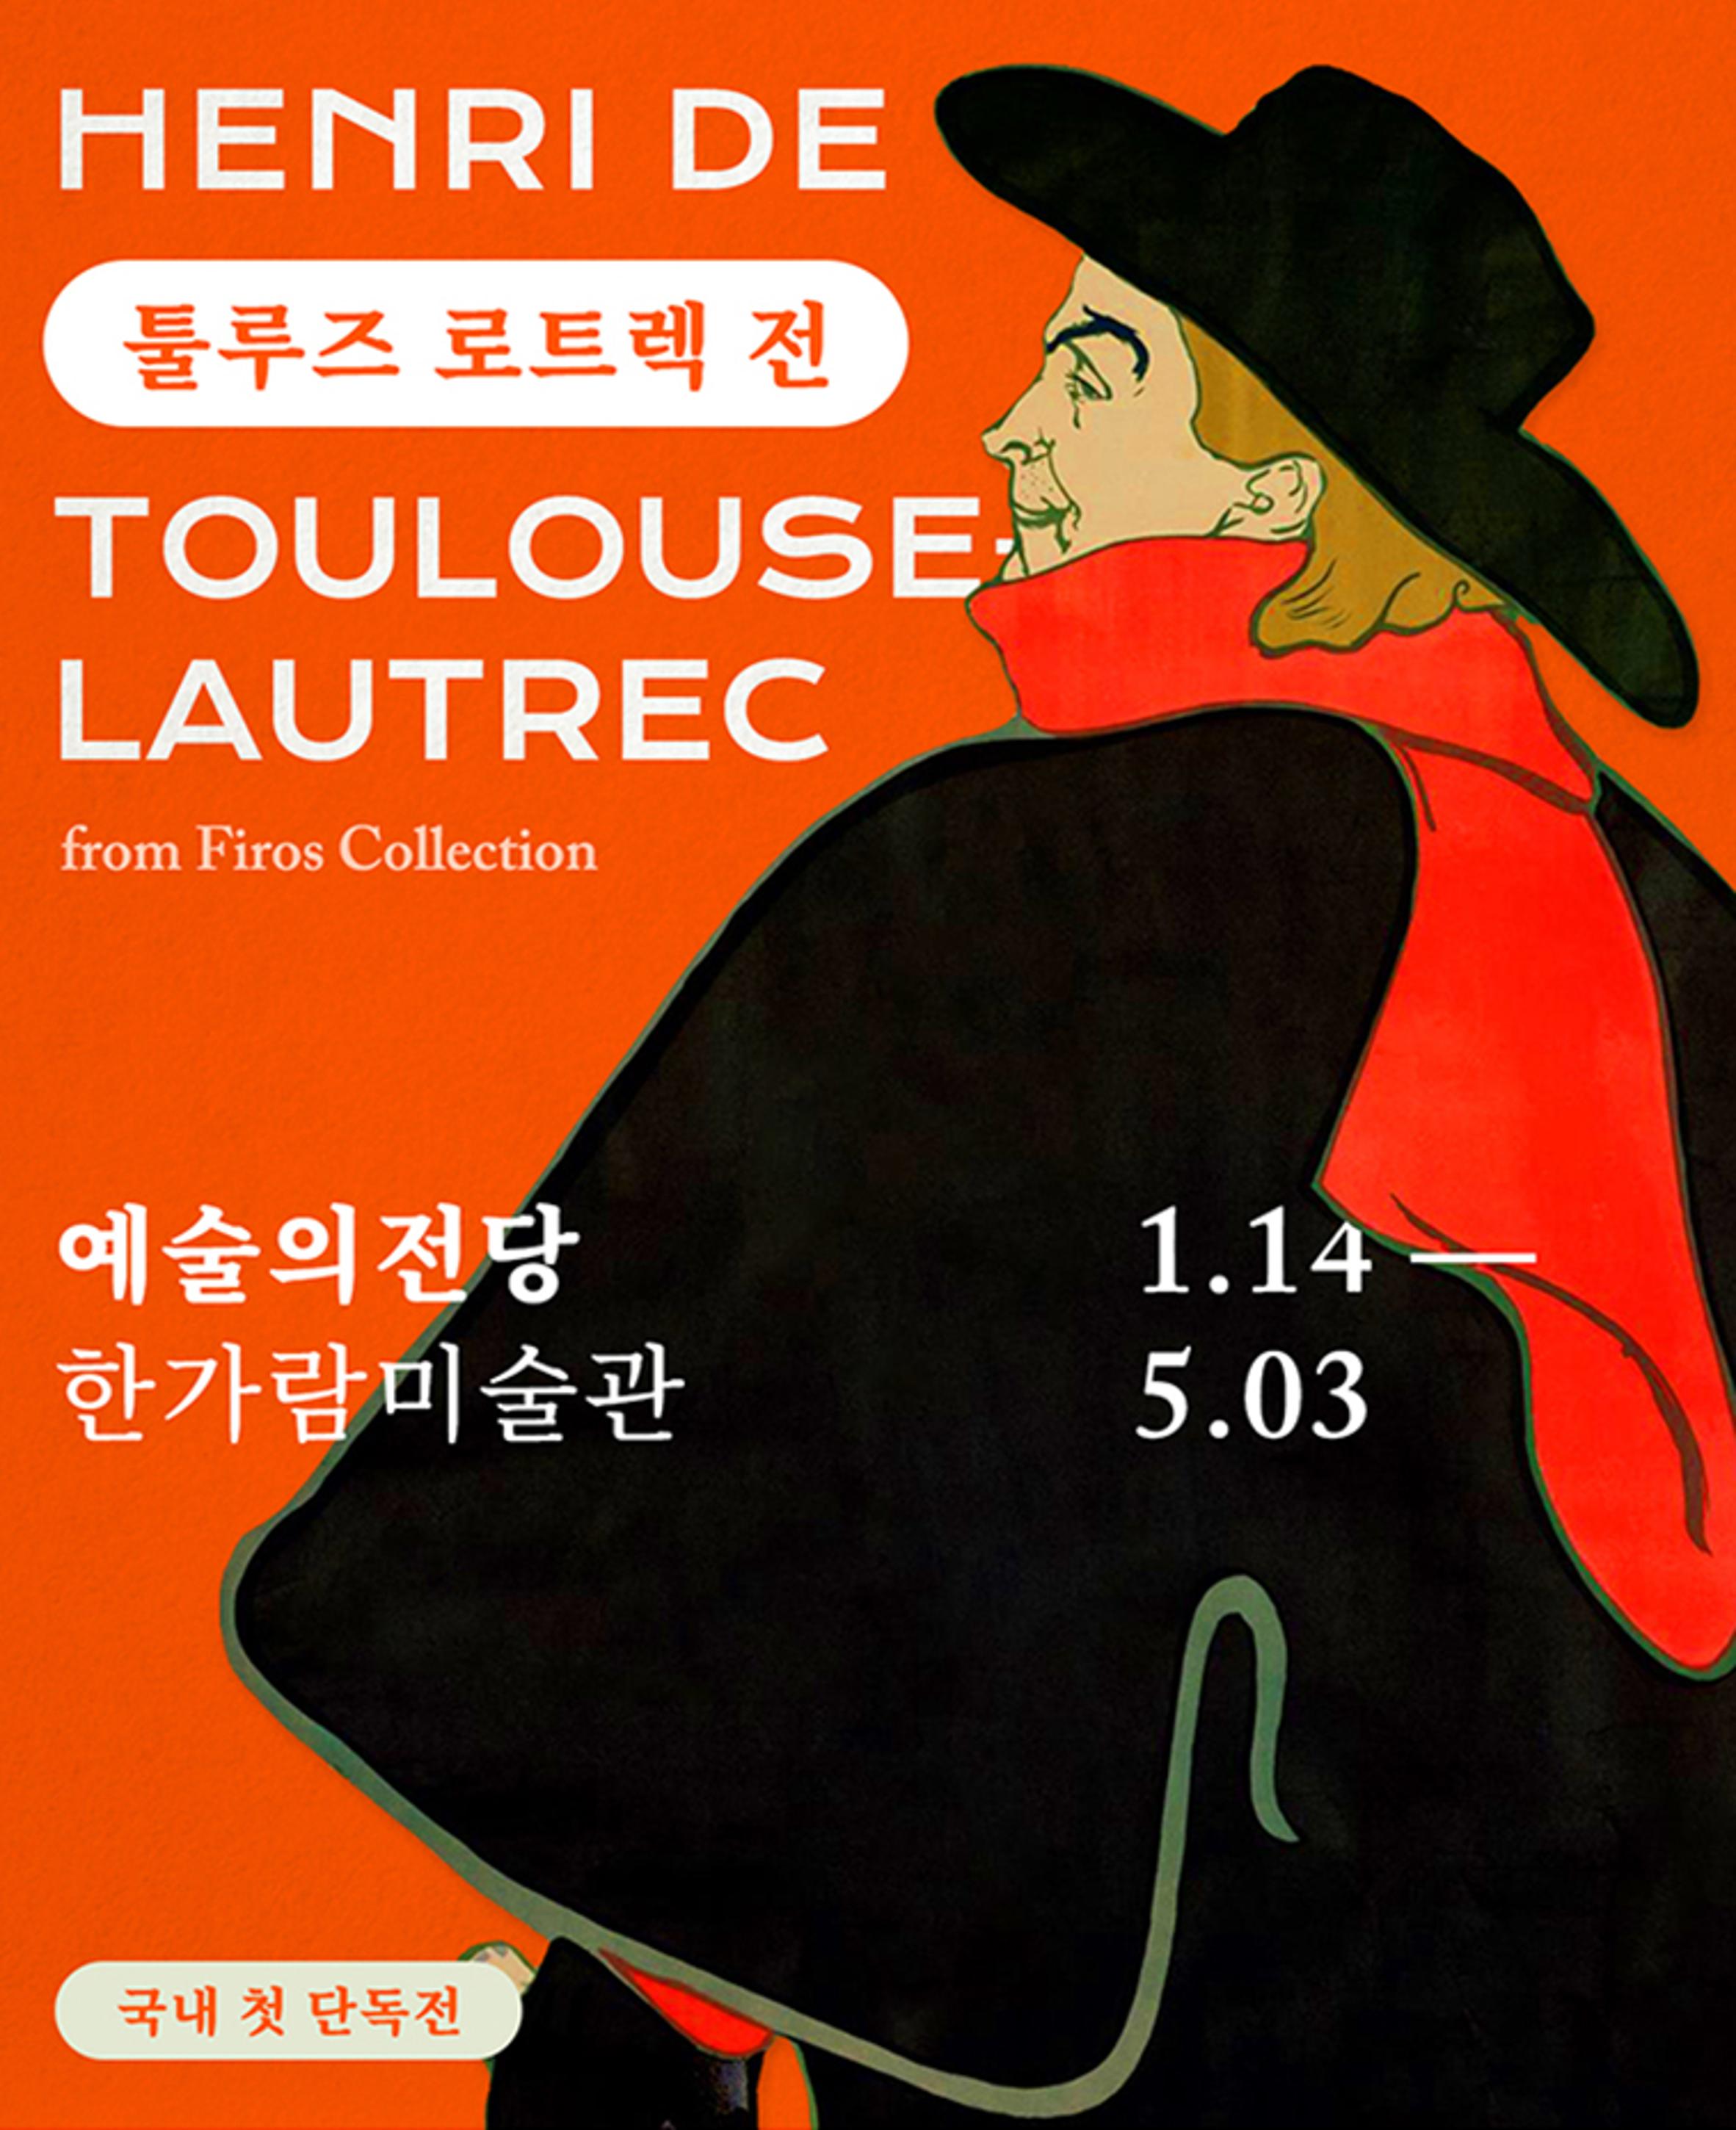 HENRI DE<br>
	톨루즈 로트렉 전<br>
	TOULOUSE<br>
	LAUTREC<br>
	from Firos Collection <br>
	예술의 전당 한가람 미술관 <br>
	1.14 - 5.03 <br>
	국내 첫 단독전